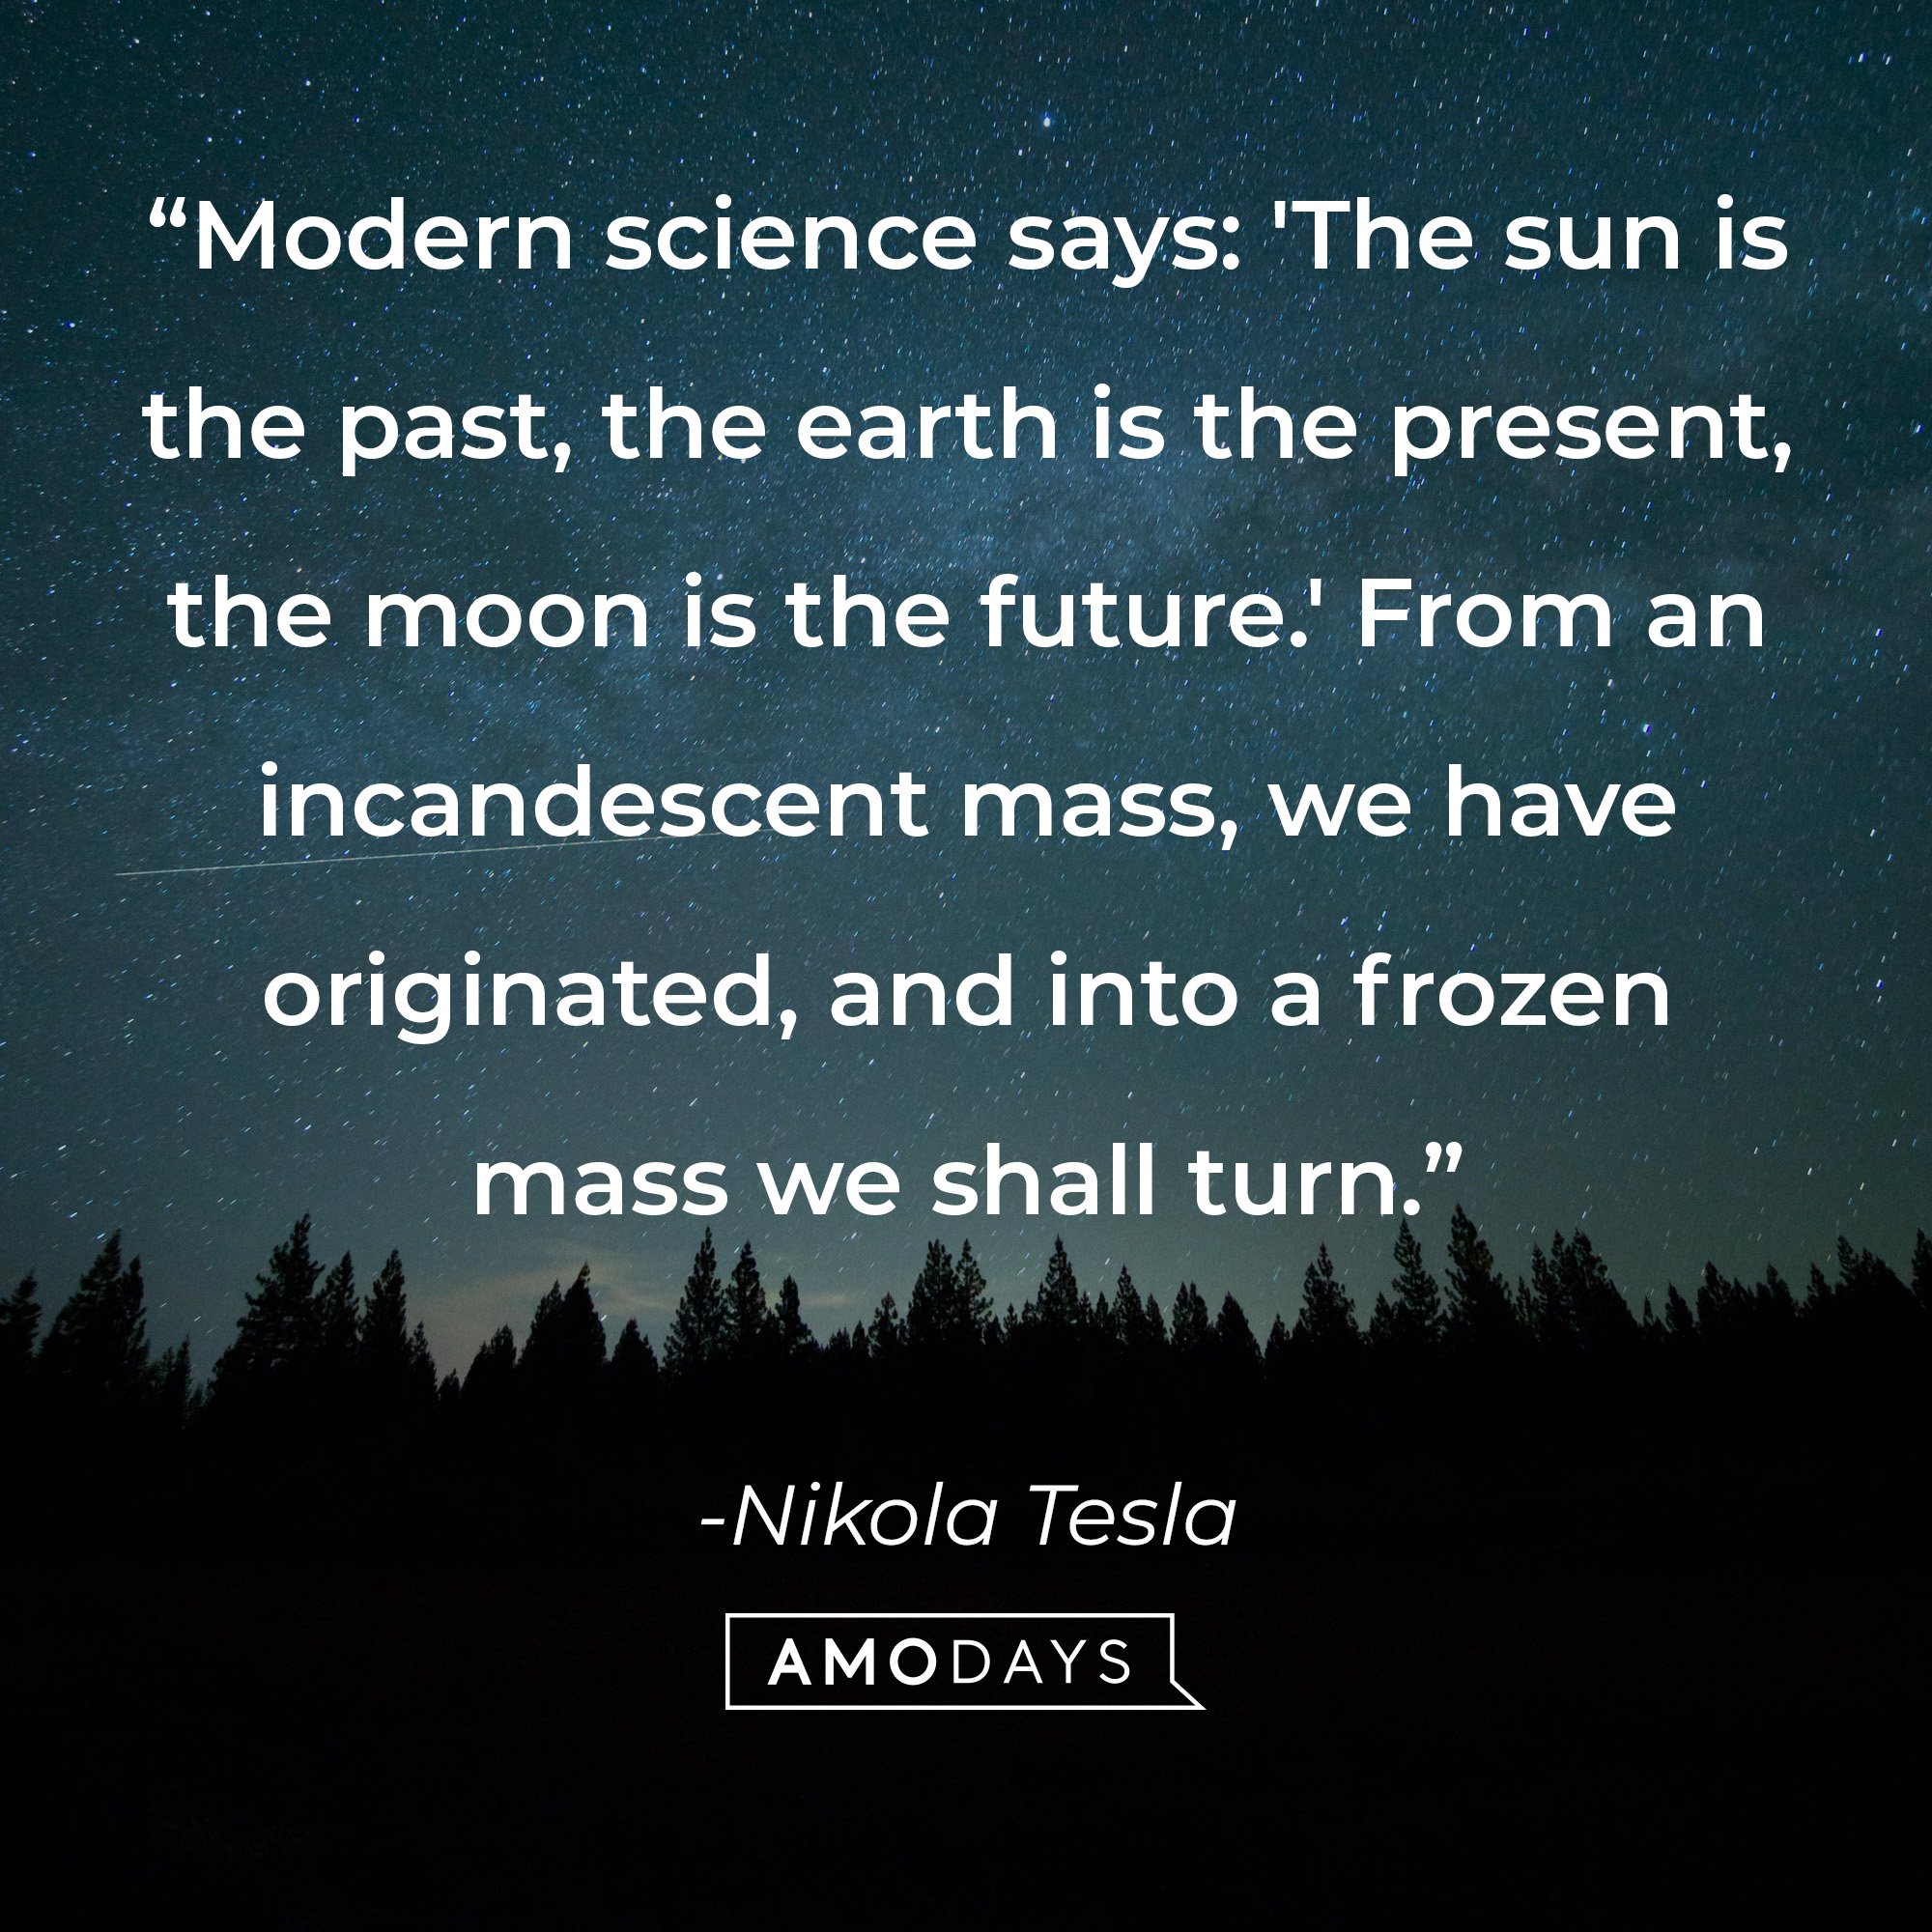 Nikola Tesla’s quote: “Modern science says: 'The sun is the past, the earth is the present, the moon is the future.' From an incandescent mass, we have originated, and into a frozen mass, we shall turn.” | Image: AmoDays